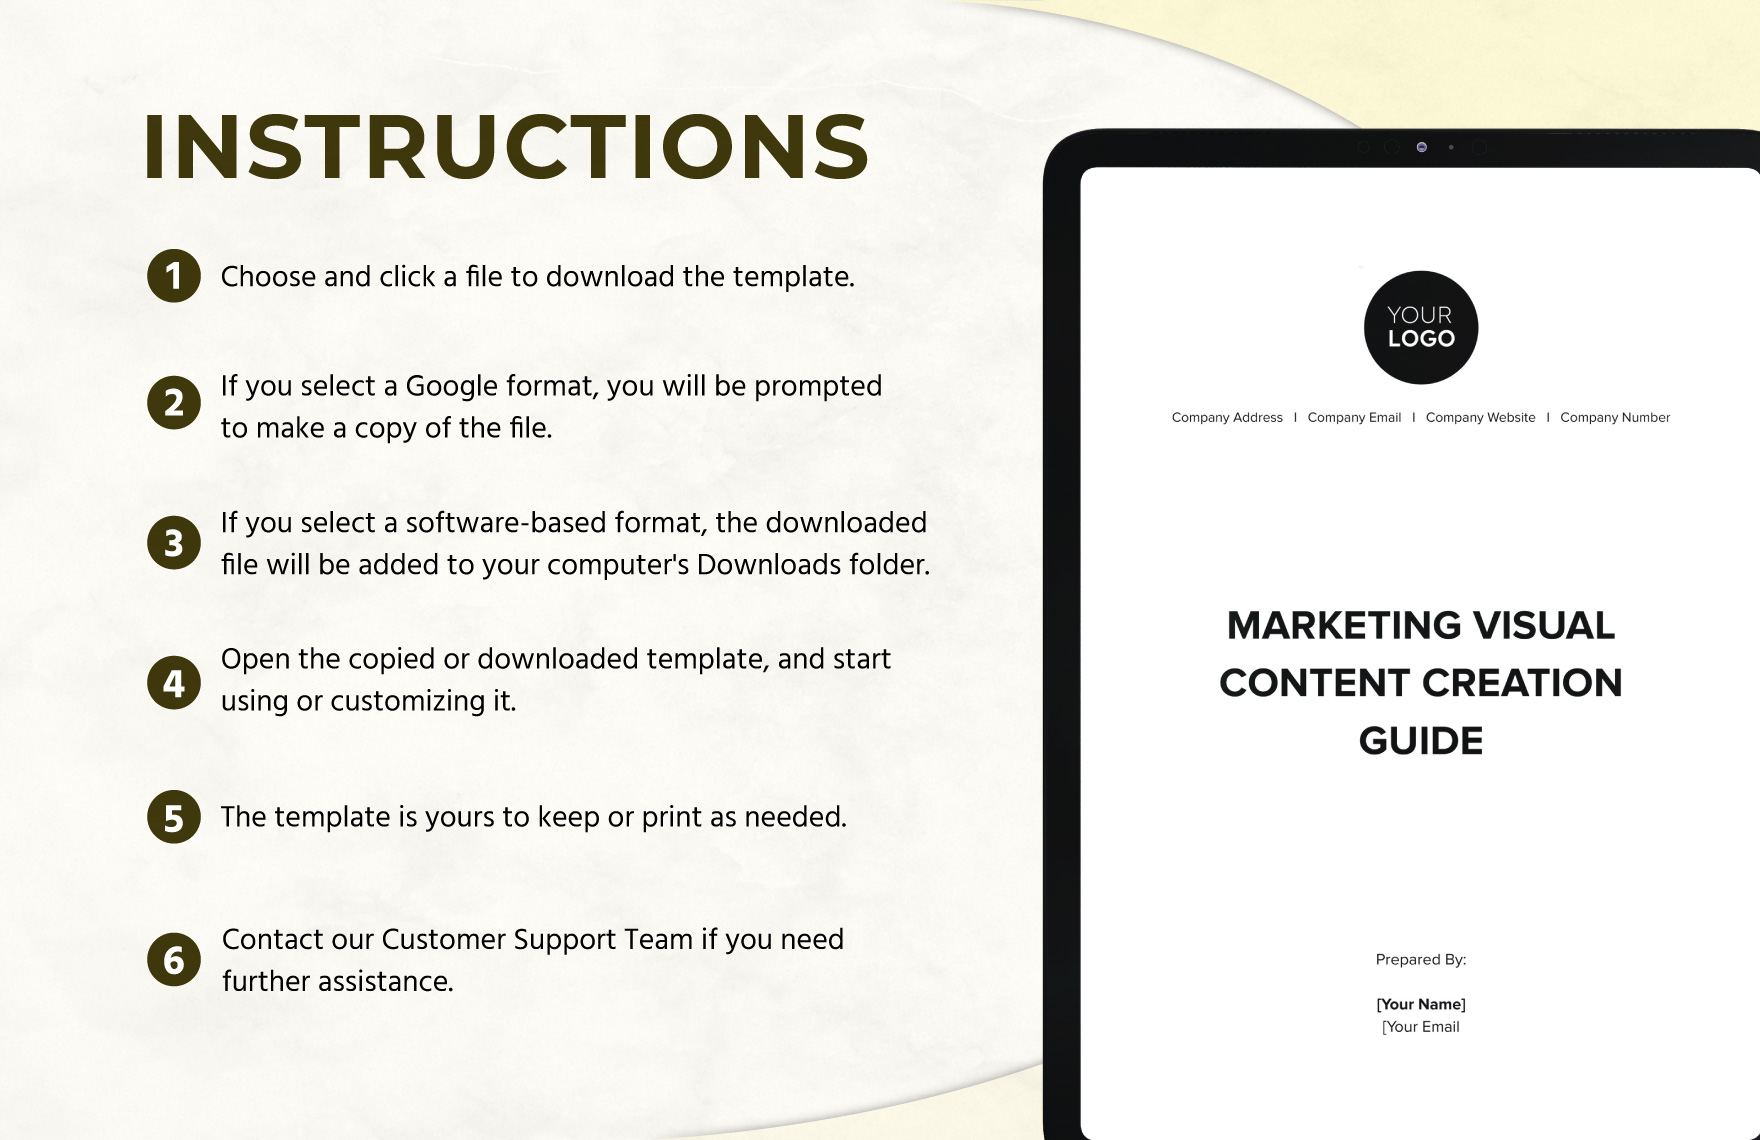 Marketing Visual Content Creation Guide Template